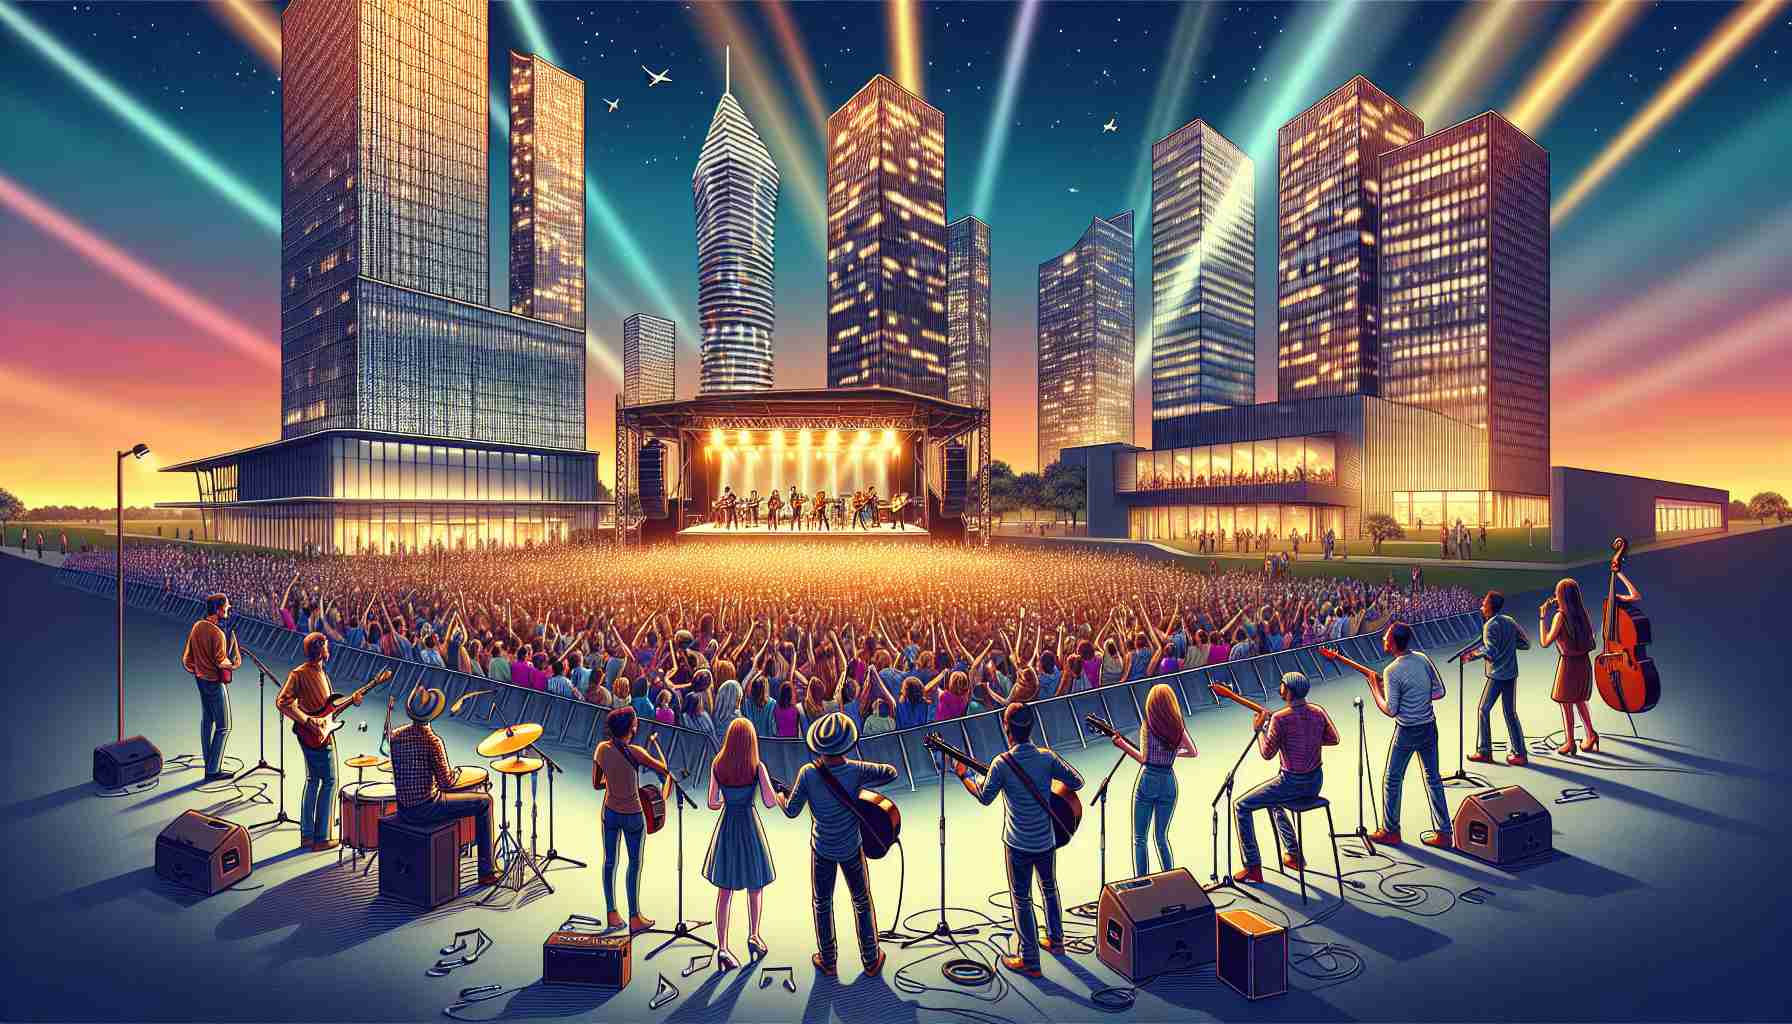 A high definition image illustrating the revitalization of the North Texas music scene through the introduction of a new concert series. Imagine the scene brimming with excitement, featuring a lively outdoor concert with a diverse range of musicians on stage, various music instruments and a lively crowd of enthusiastic music lovers. The gender and descent of each musician and audience member should vary, ensuring diversity in the image. Vibrant lights shine on the stage with modern architecture denoting the urban setting of North Texas in the backdrop.